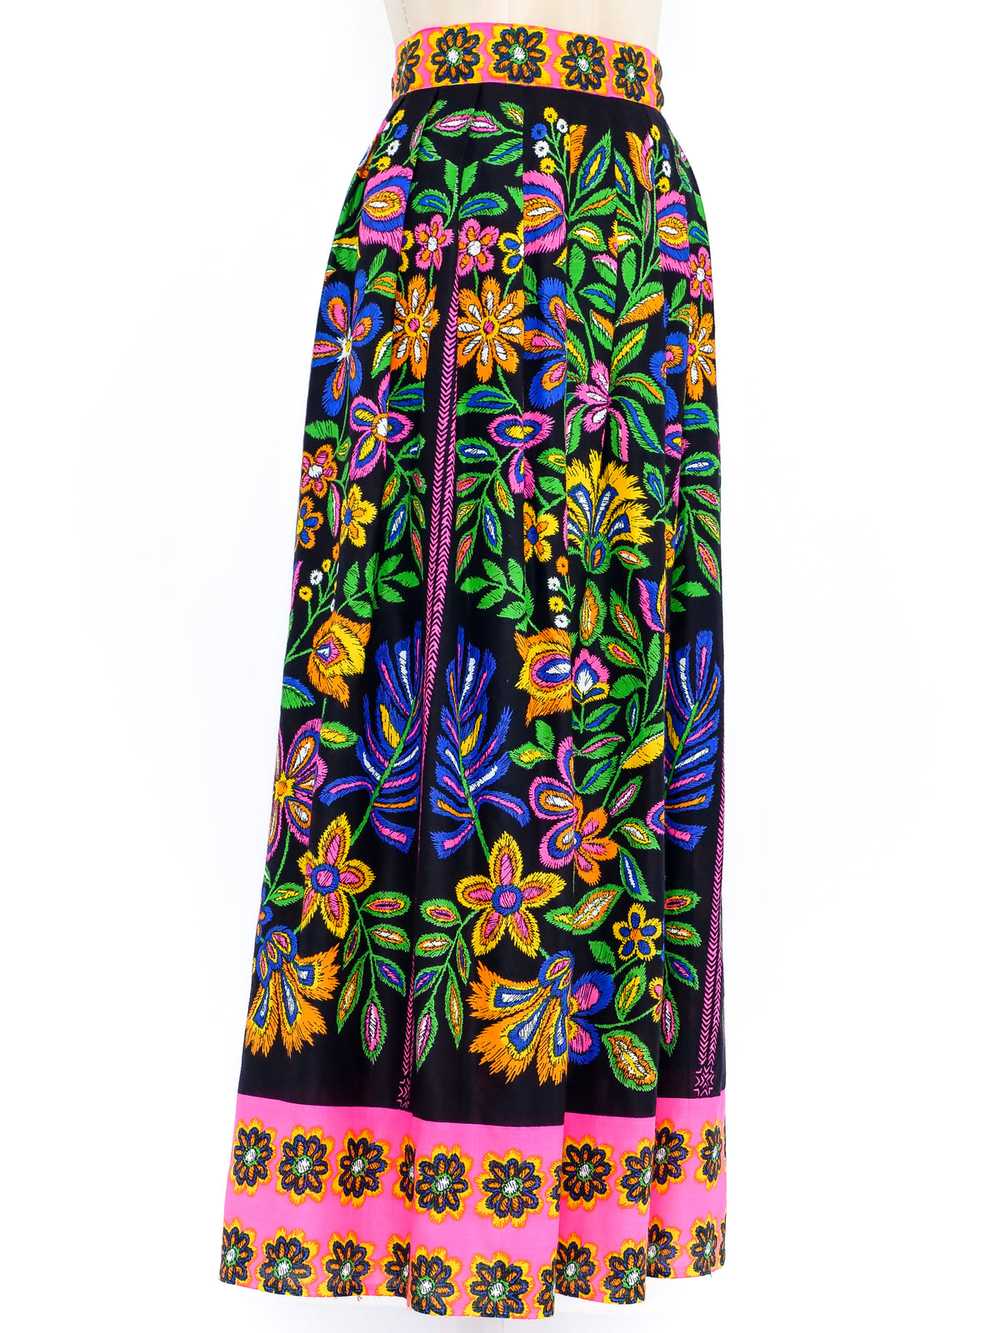 Psychedelic Floral Printed Skirt - image 3